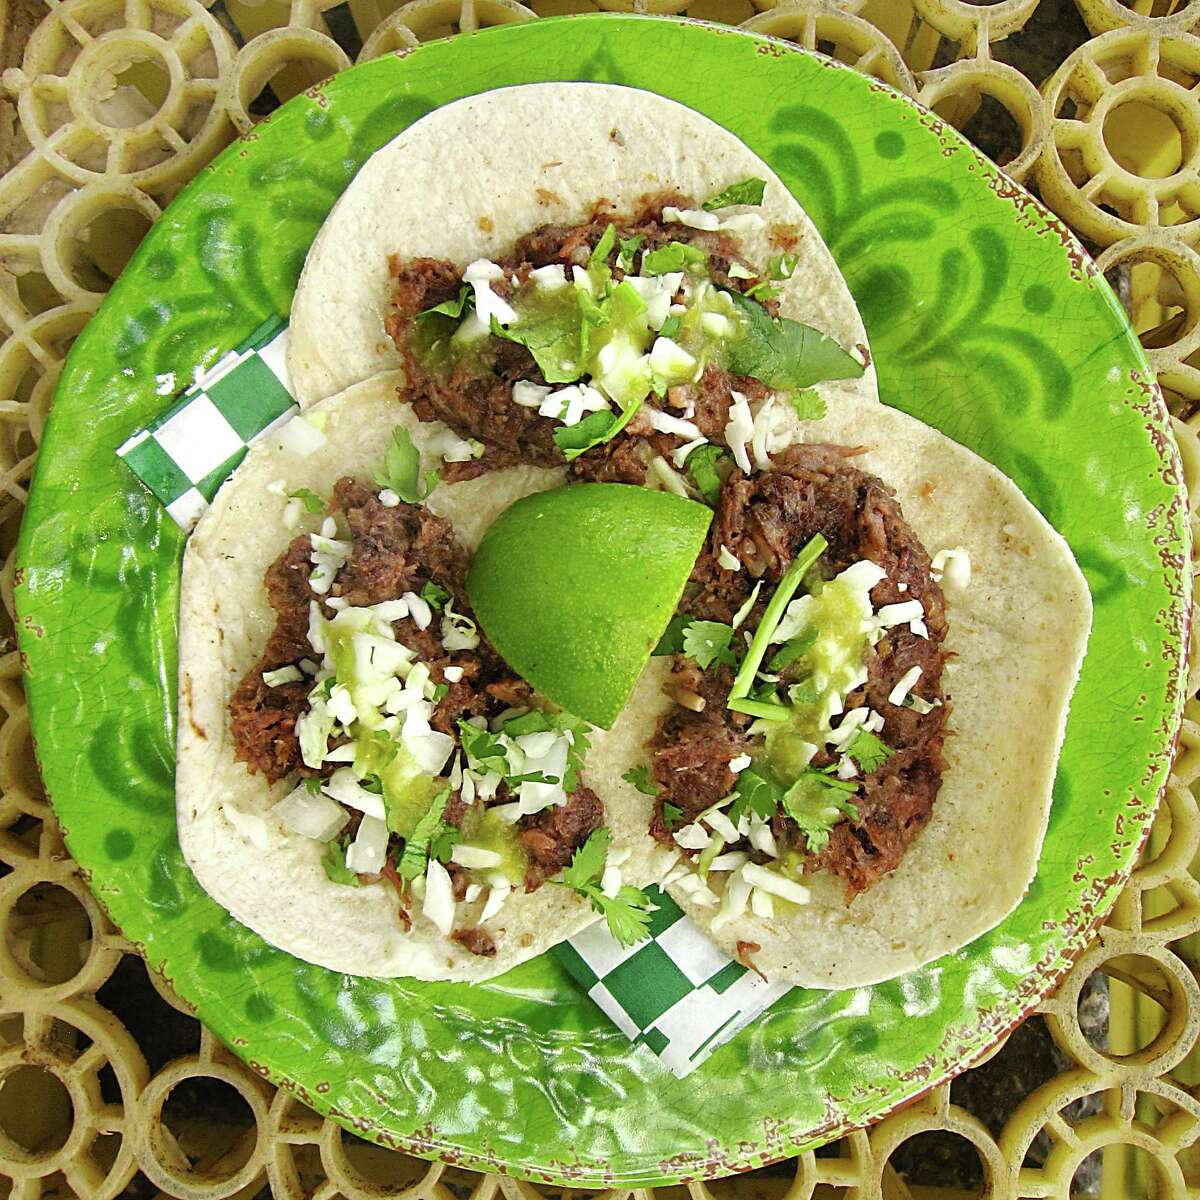 Barbacoa tacos with cabbage, cilantro and salsa verde on hot corn tortillas from the Tacos Lira truck.